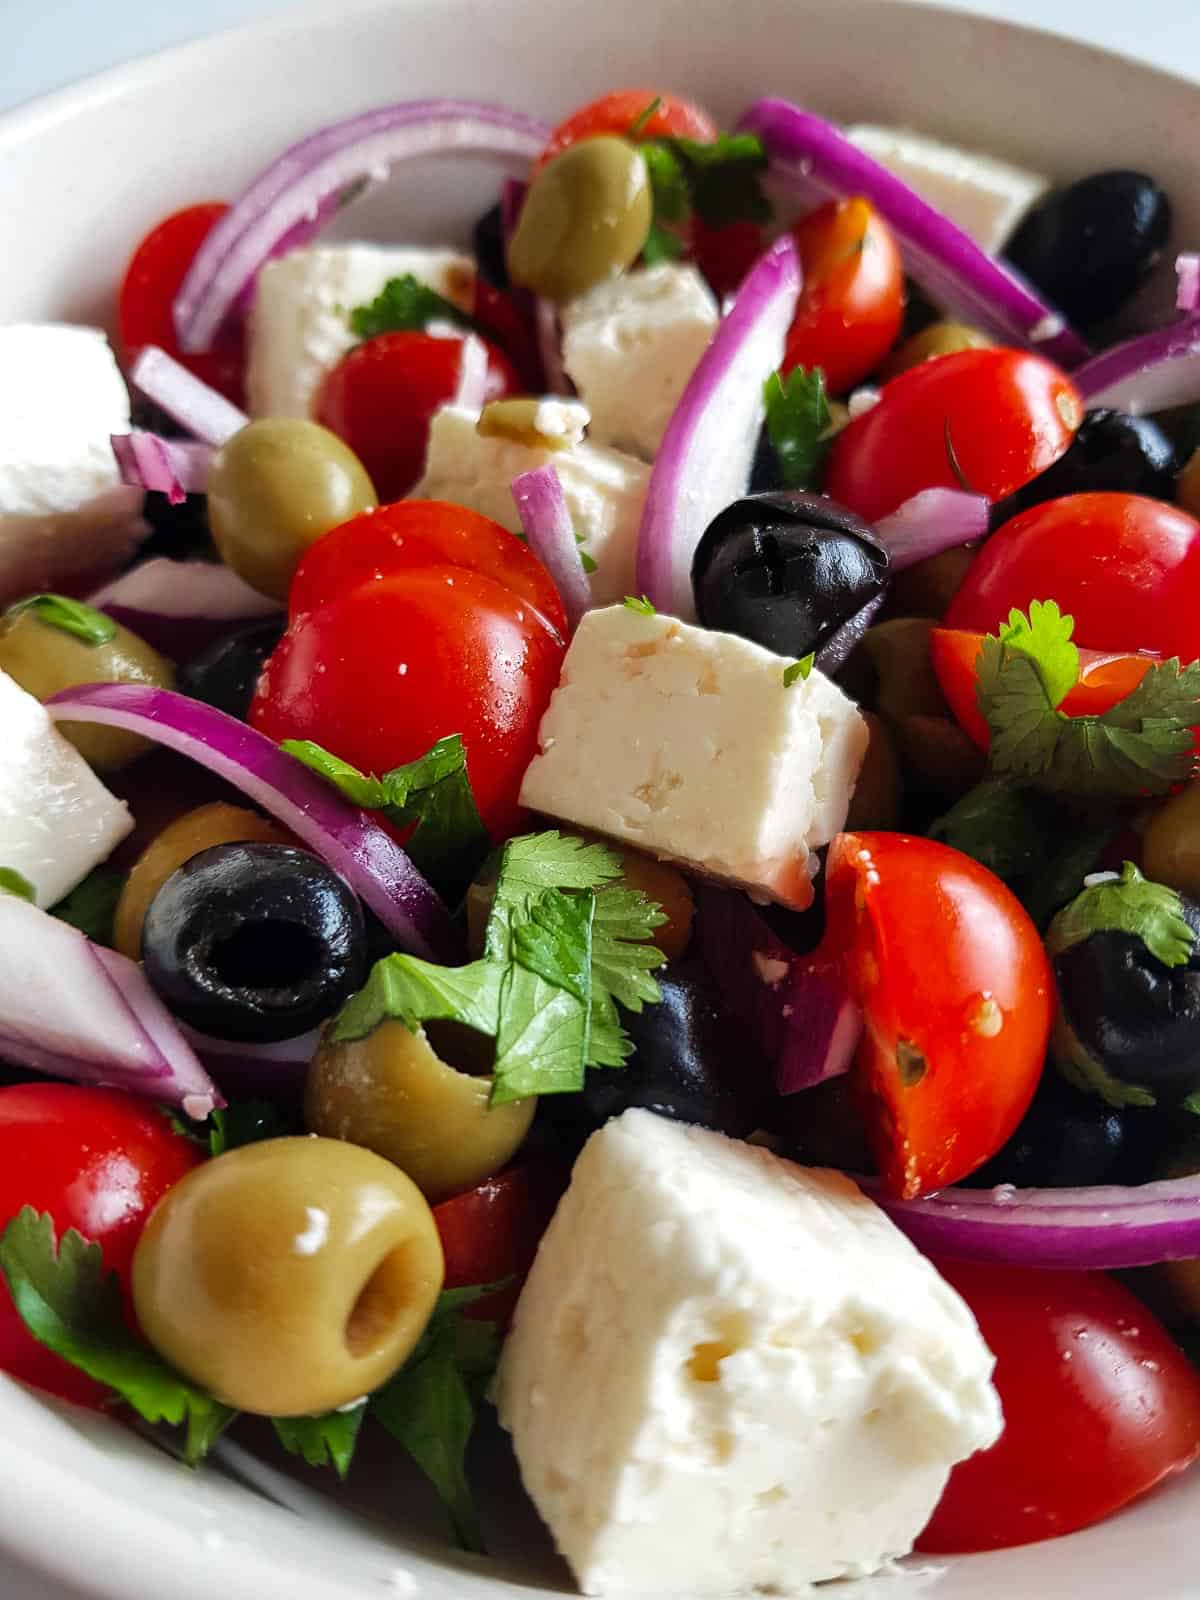 Mixed olive salad with feta and tomatoes.